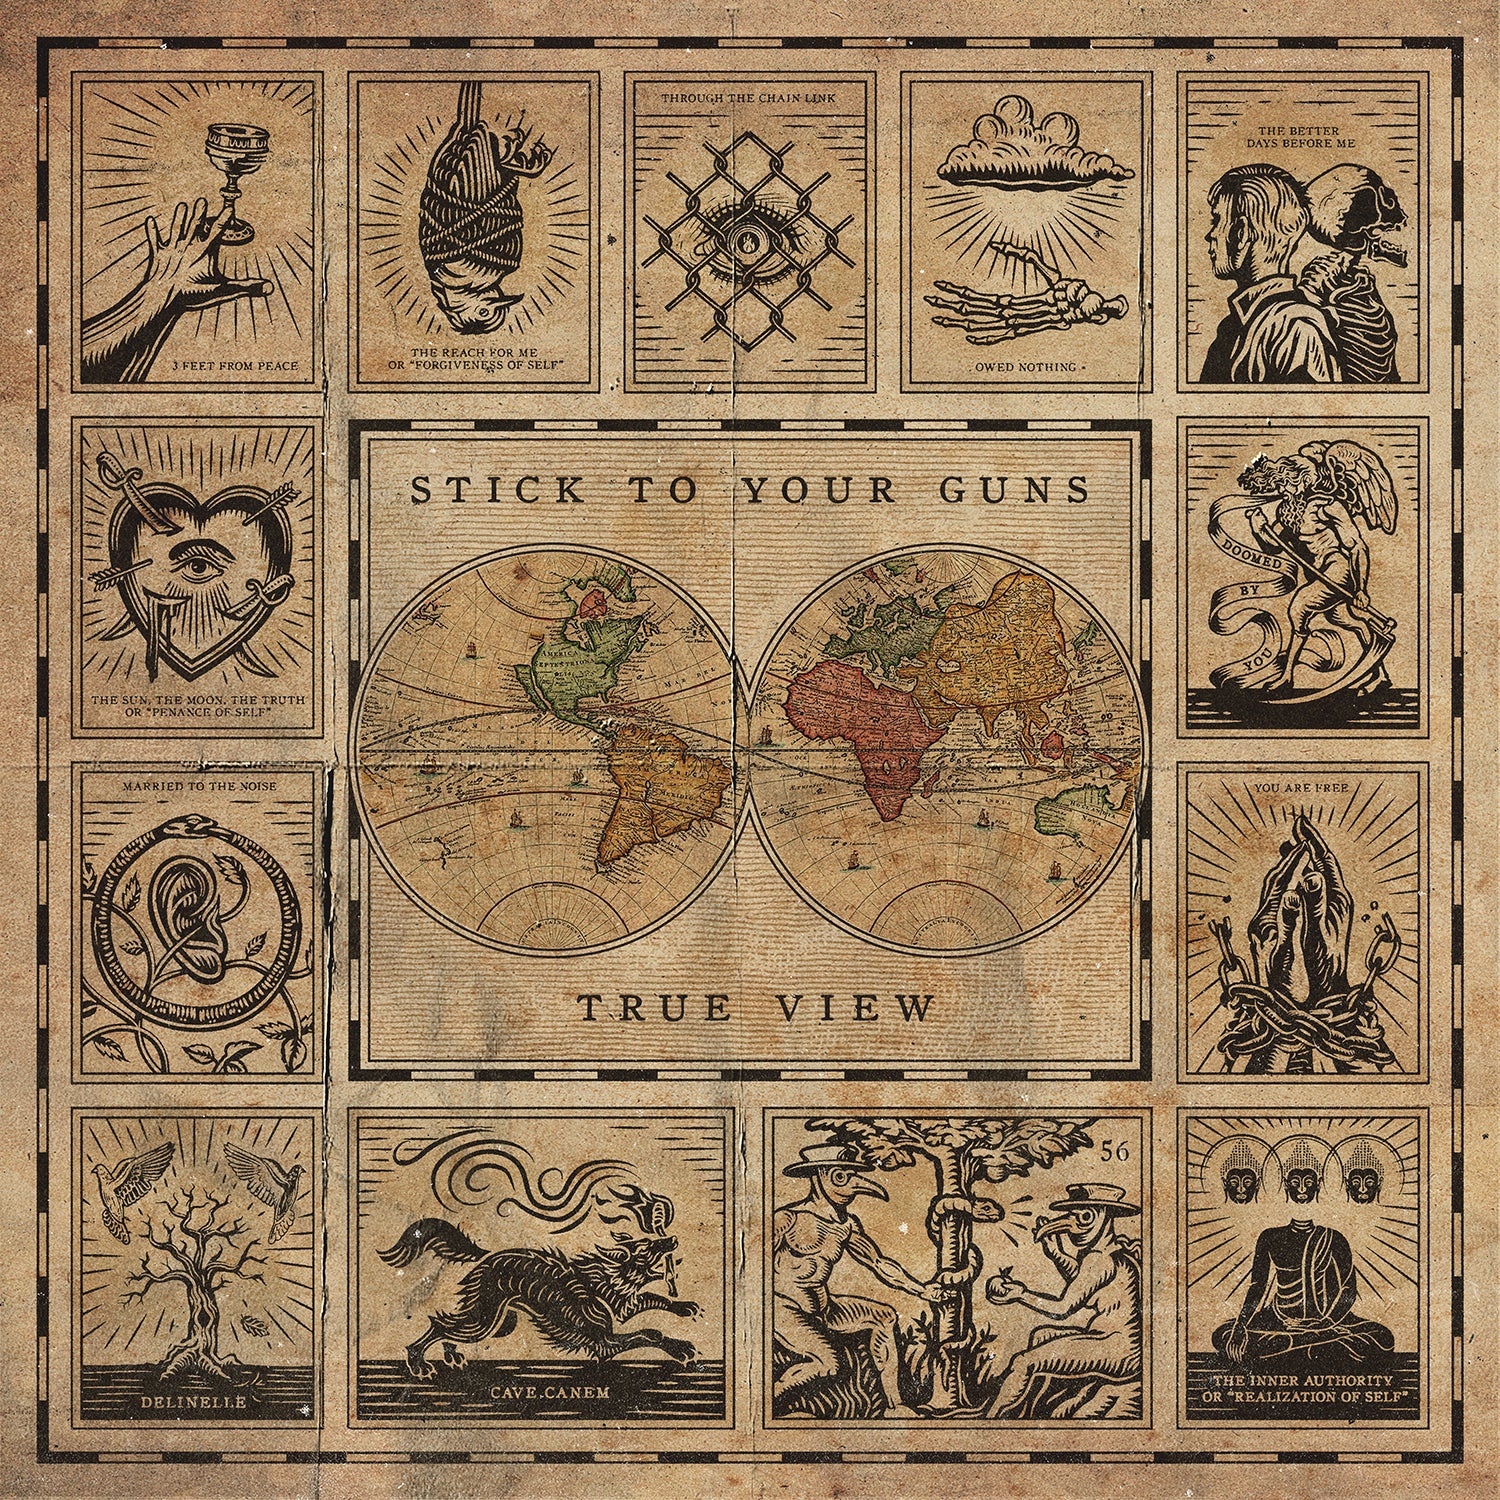 STICK TO YOUR GUNS "True View" Tape